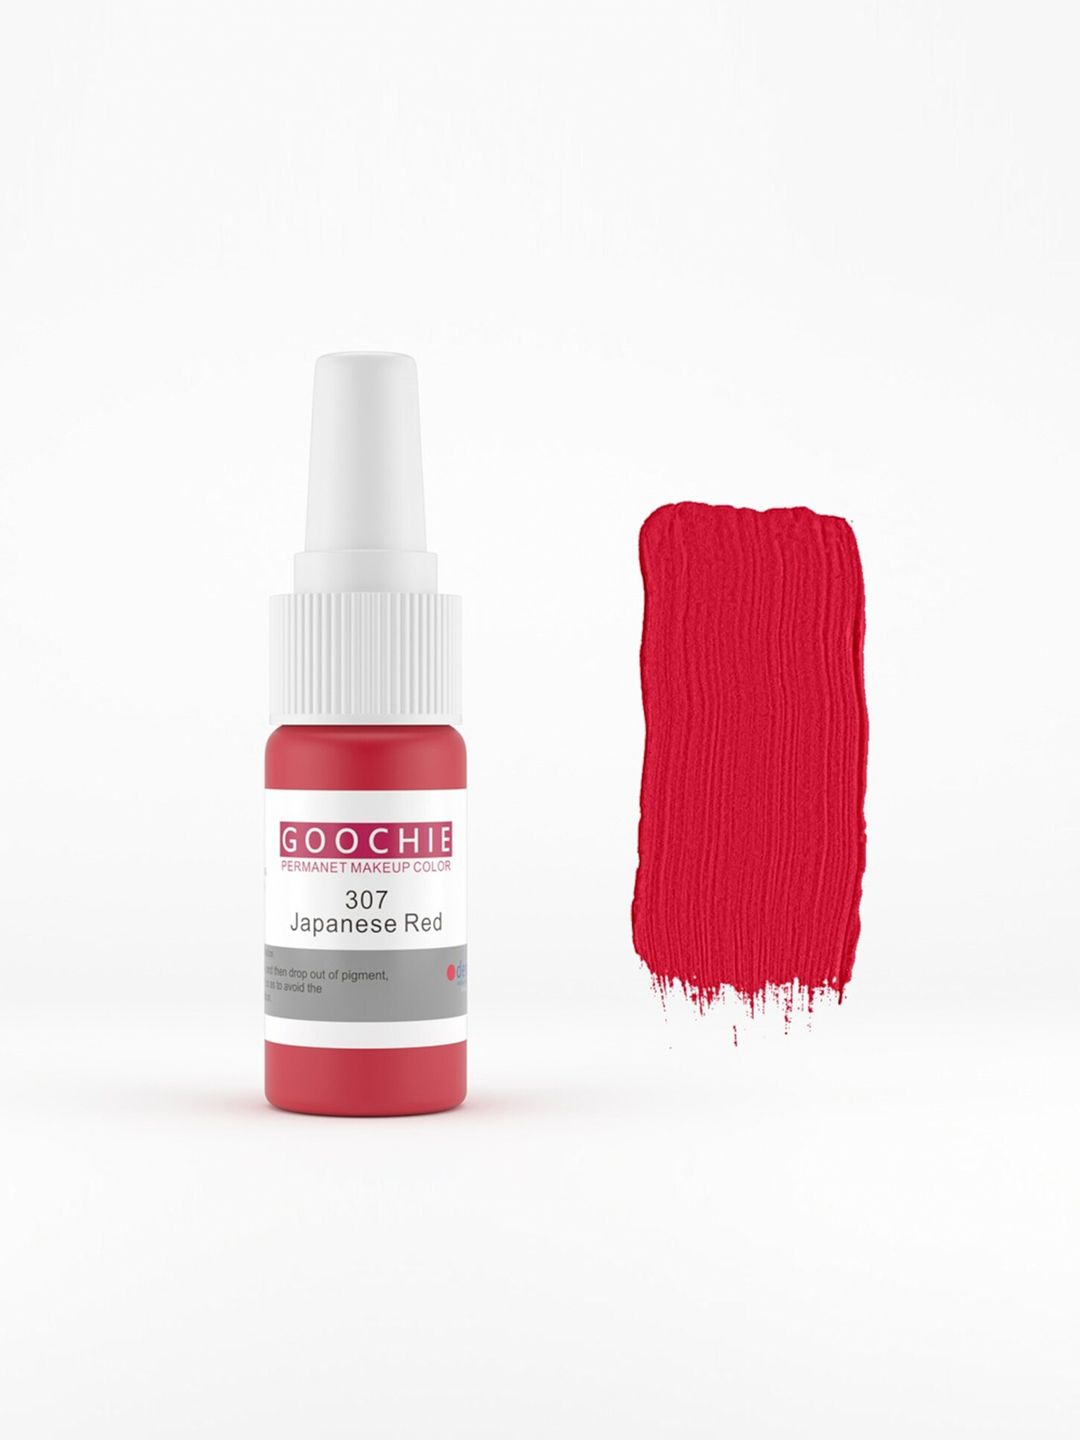 GOOCHIE Micro Pigment Permanet Makeup Color - Japanese Red 307 15 ml Price in India